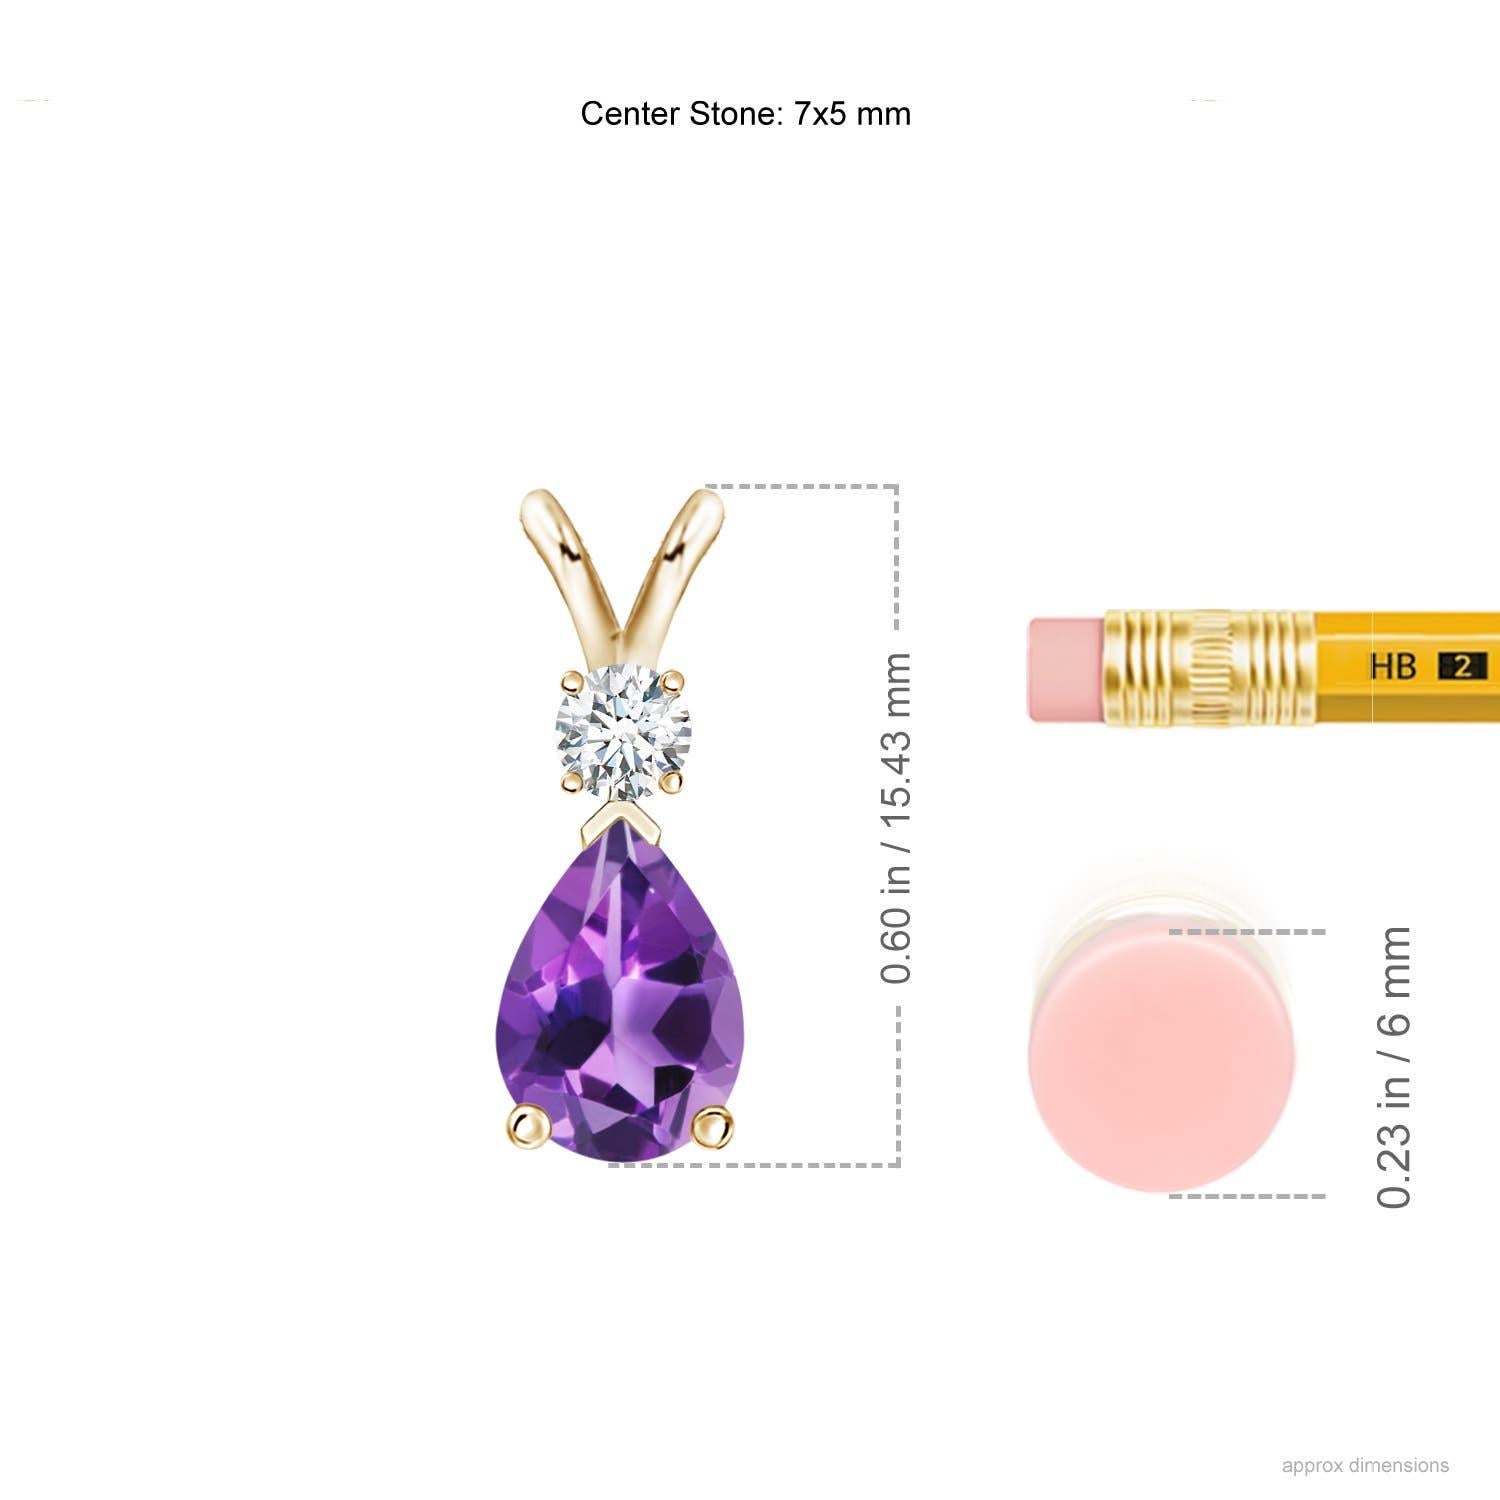 A pear-shaped deep purple amethyst is secured in a prong setting and embellished with a diamond accent on the top. Simple yet stunning, this teardrop amethyst pendant with V bale is sculpted in 14k yellow gold.